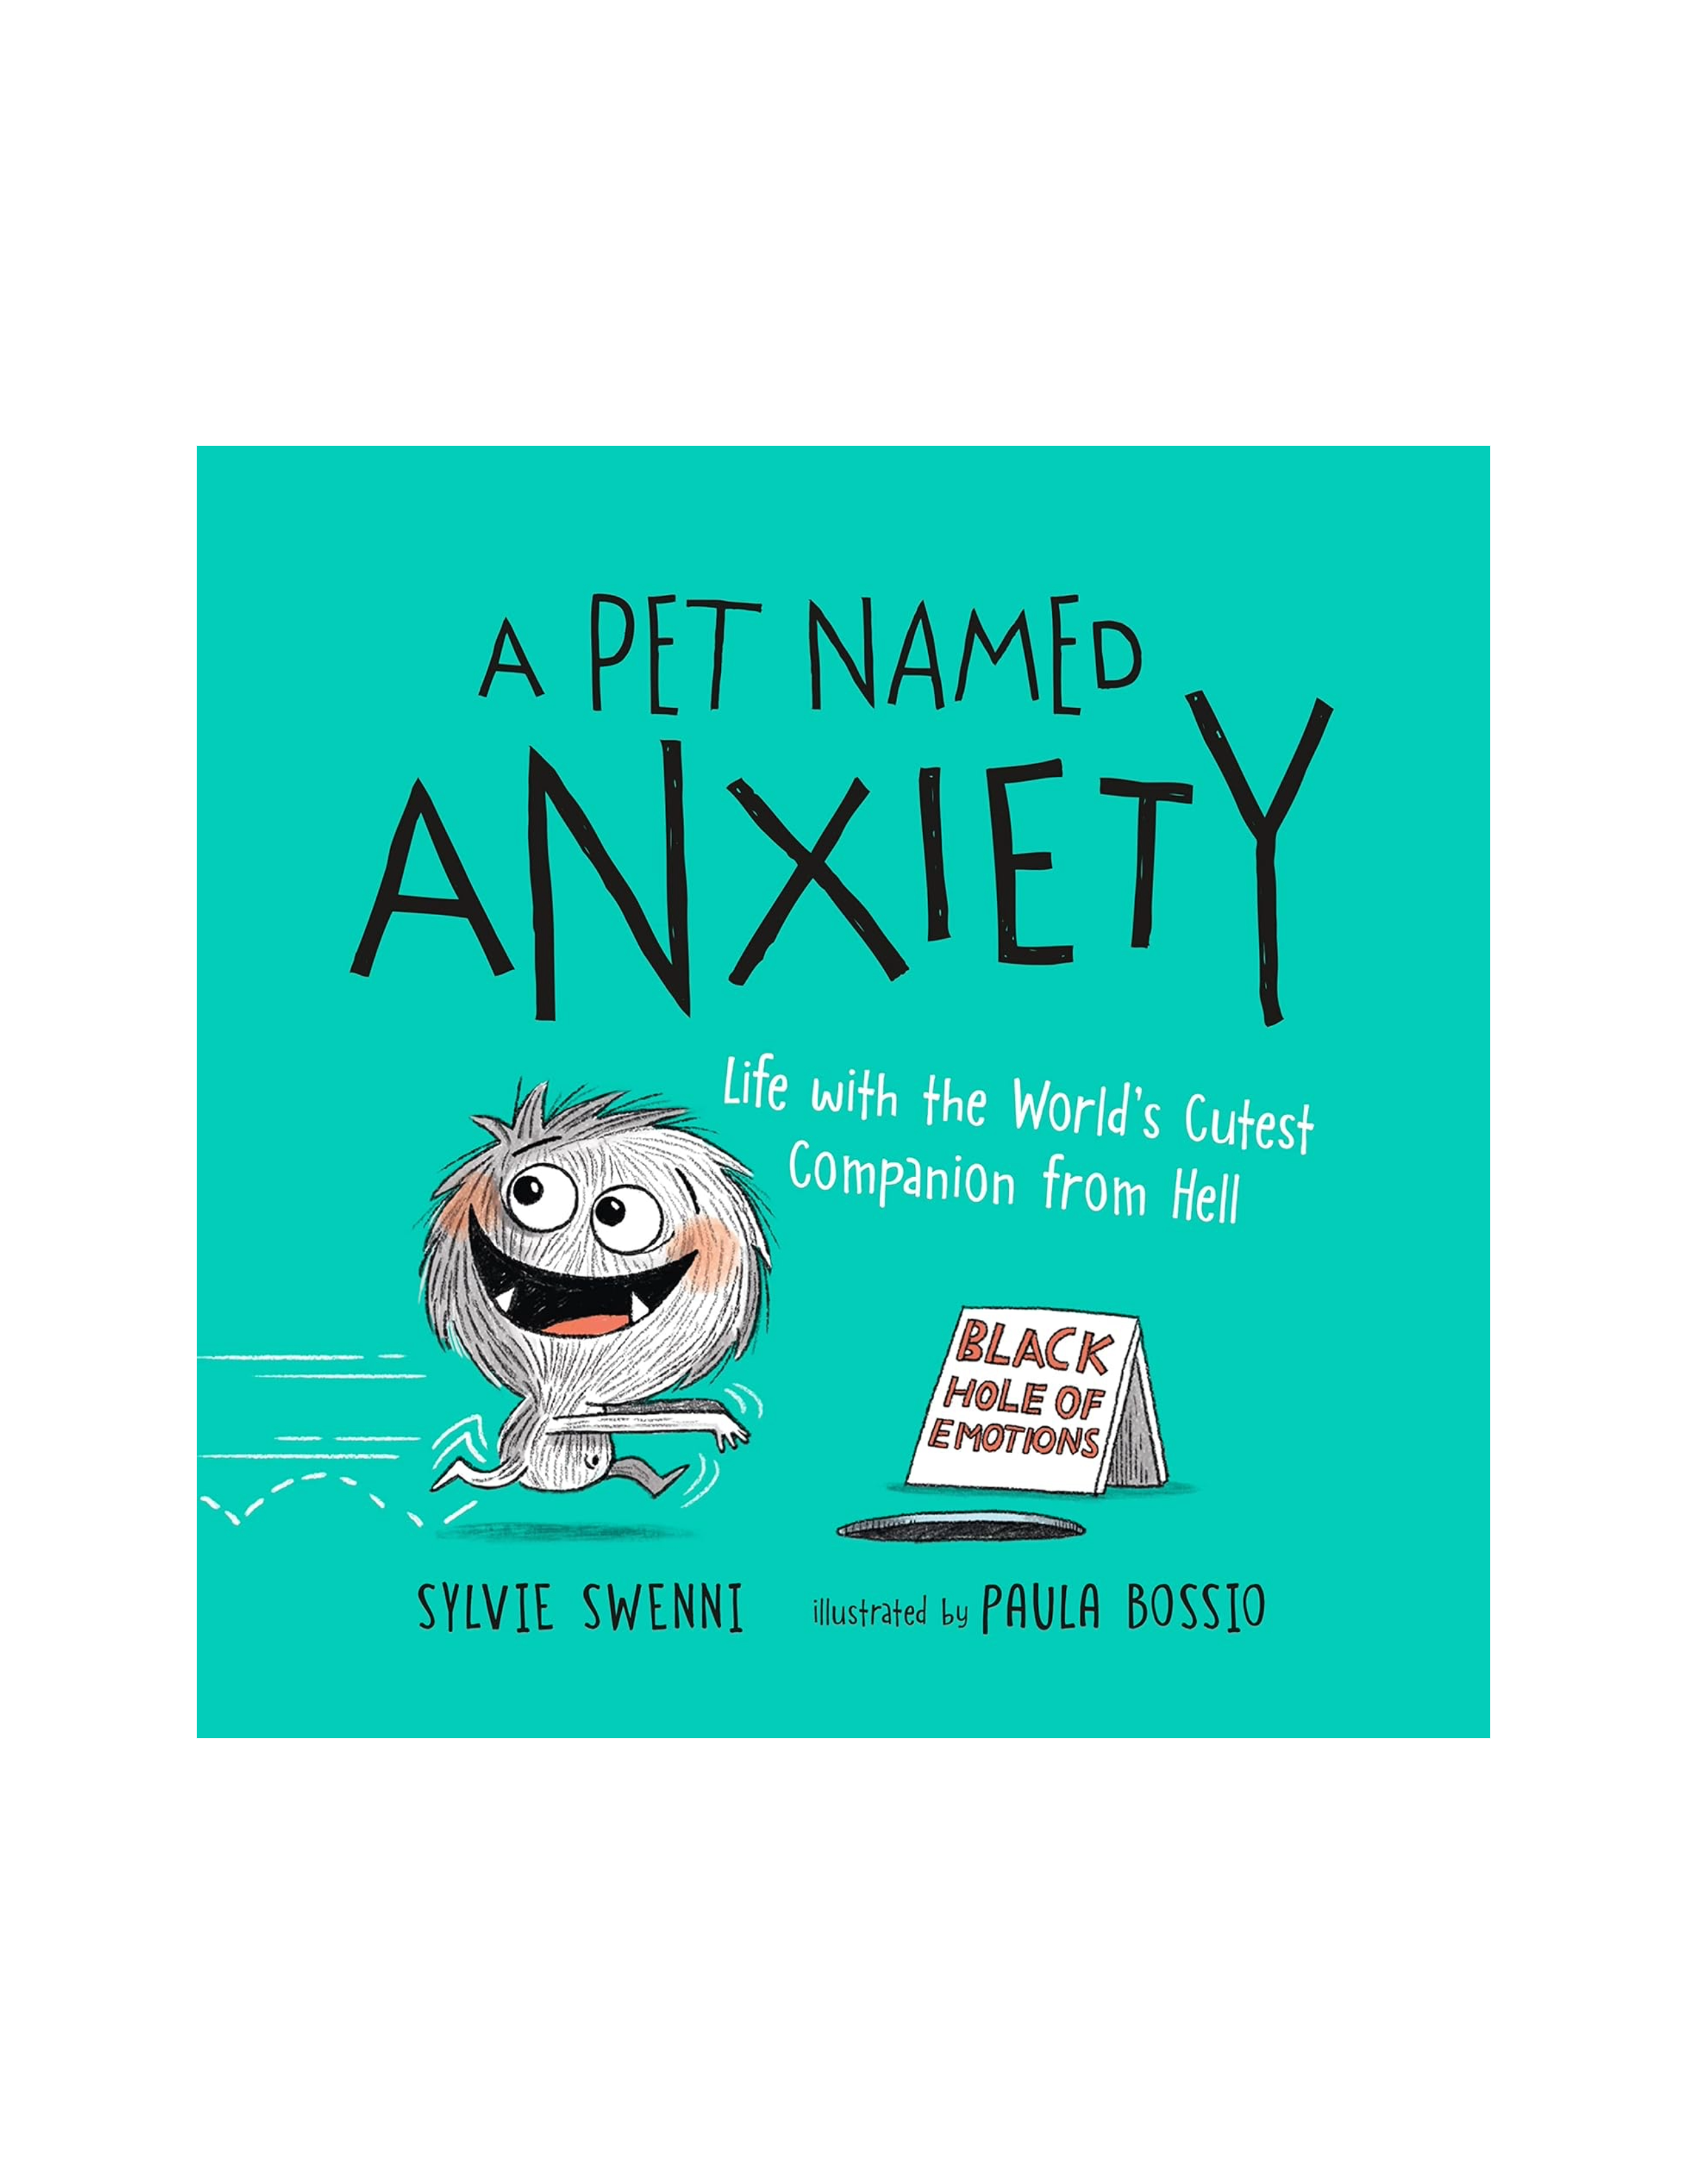 Pet Named Anxiety